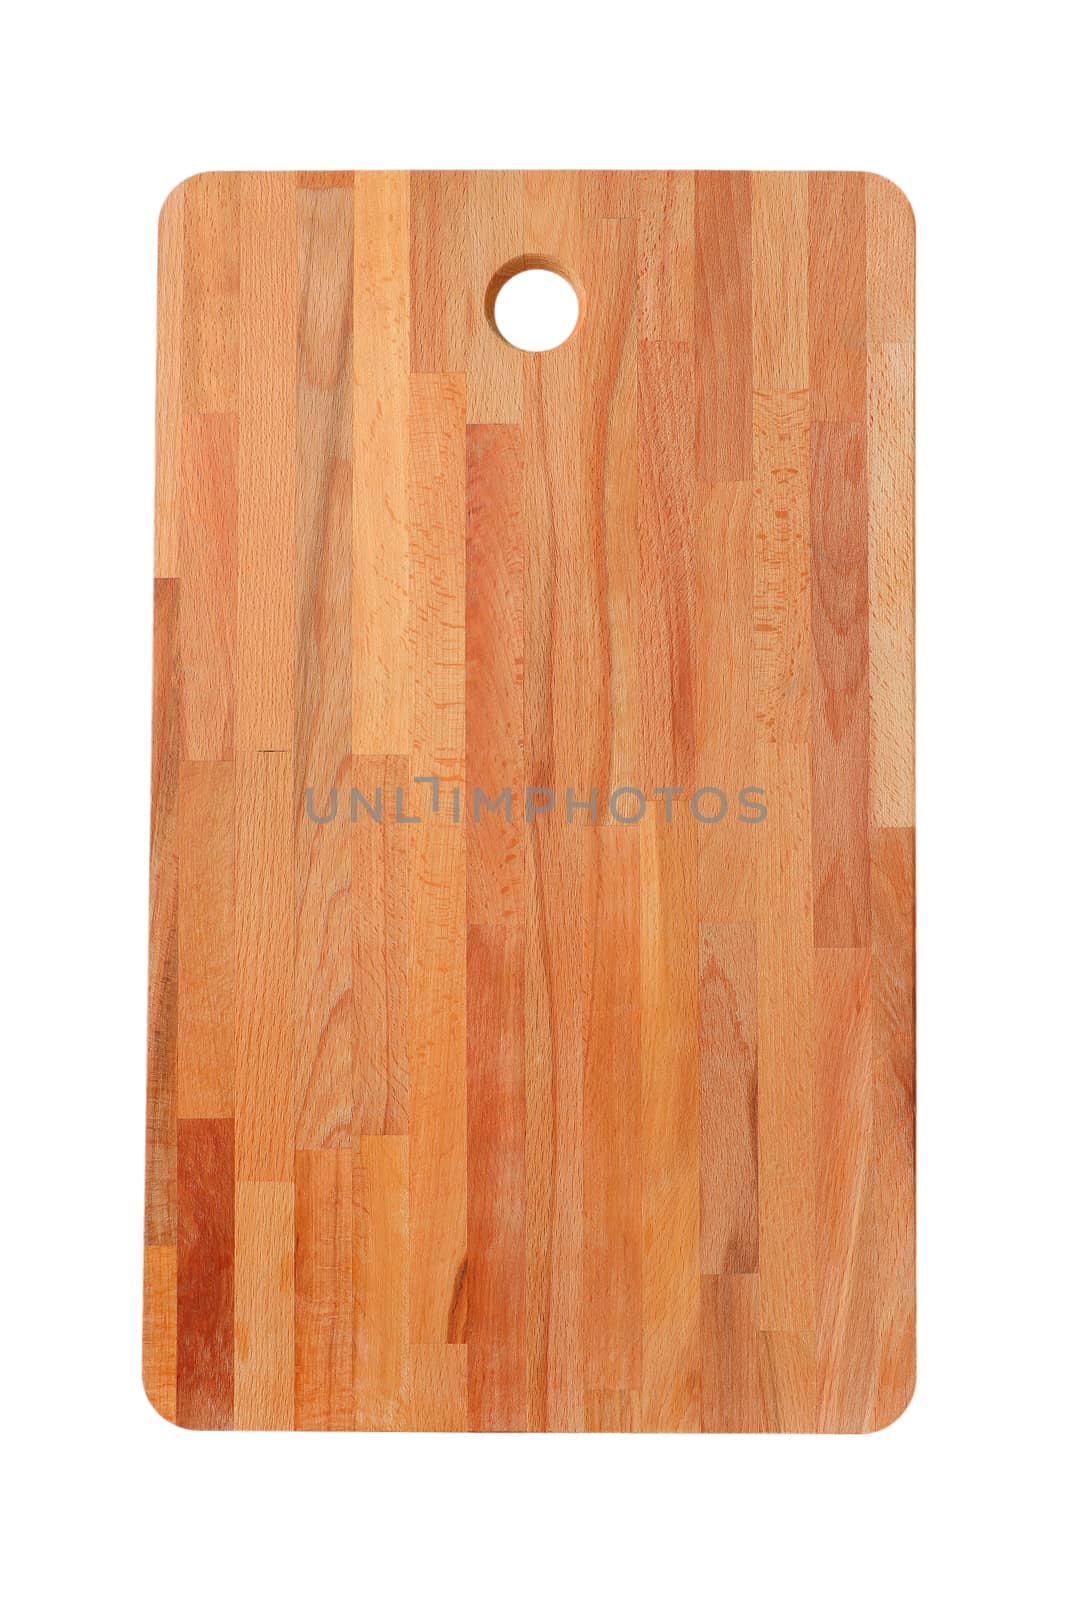 wooden cutting board with hole on white background